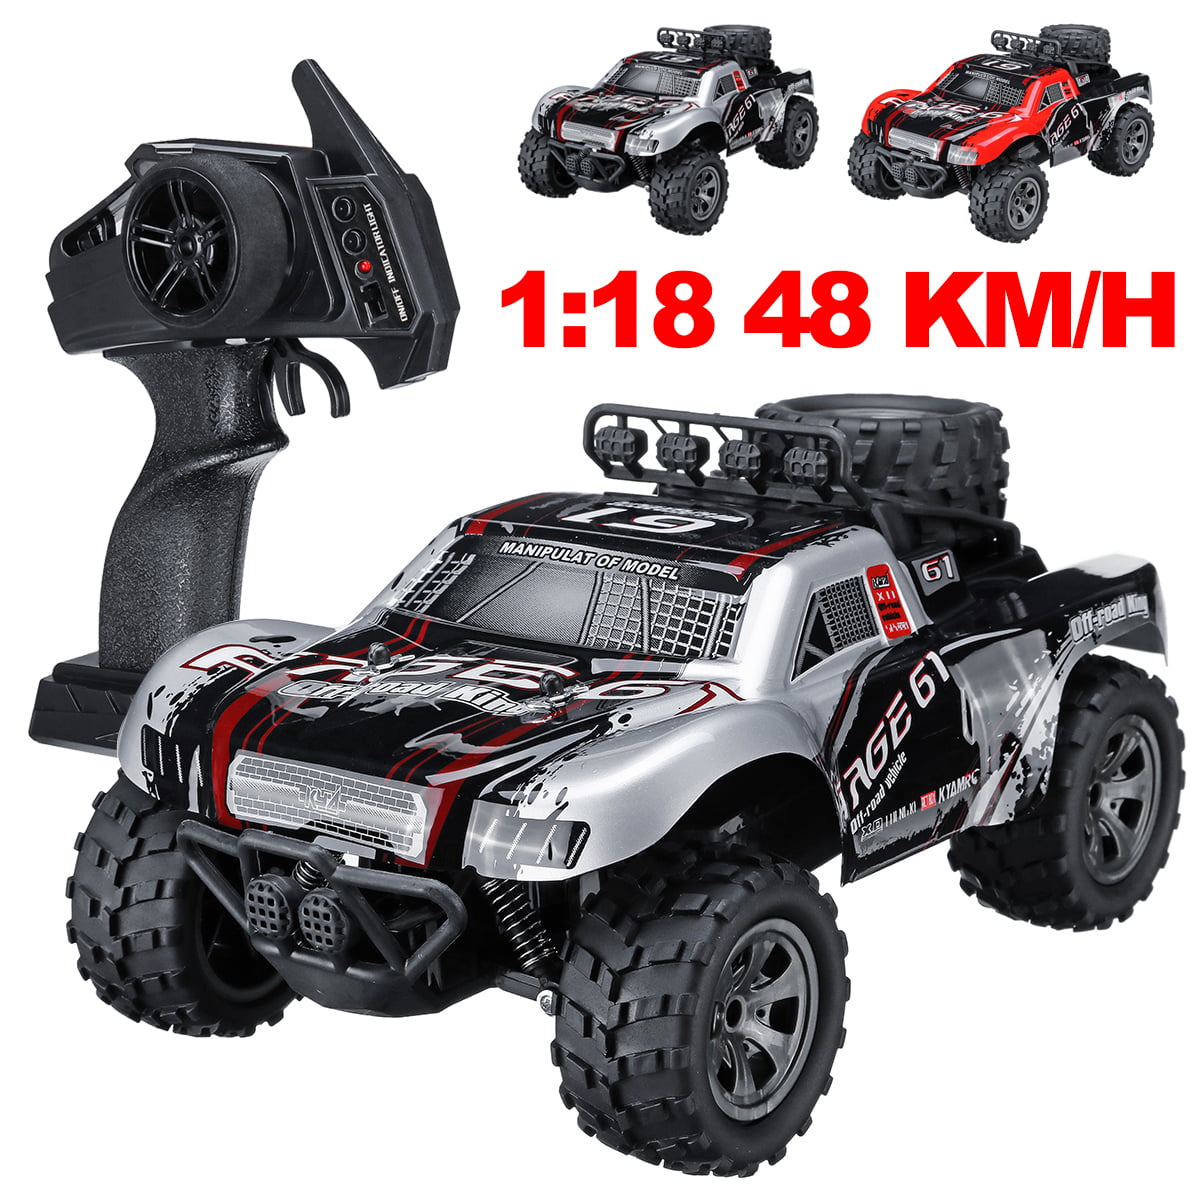 2.4GHz 1/18 Scale RC Car 4WD RC Truck Car Monster Truck Remote Control ...